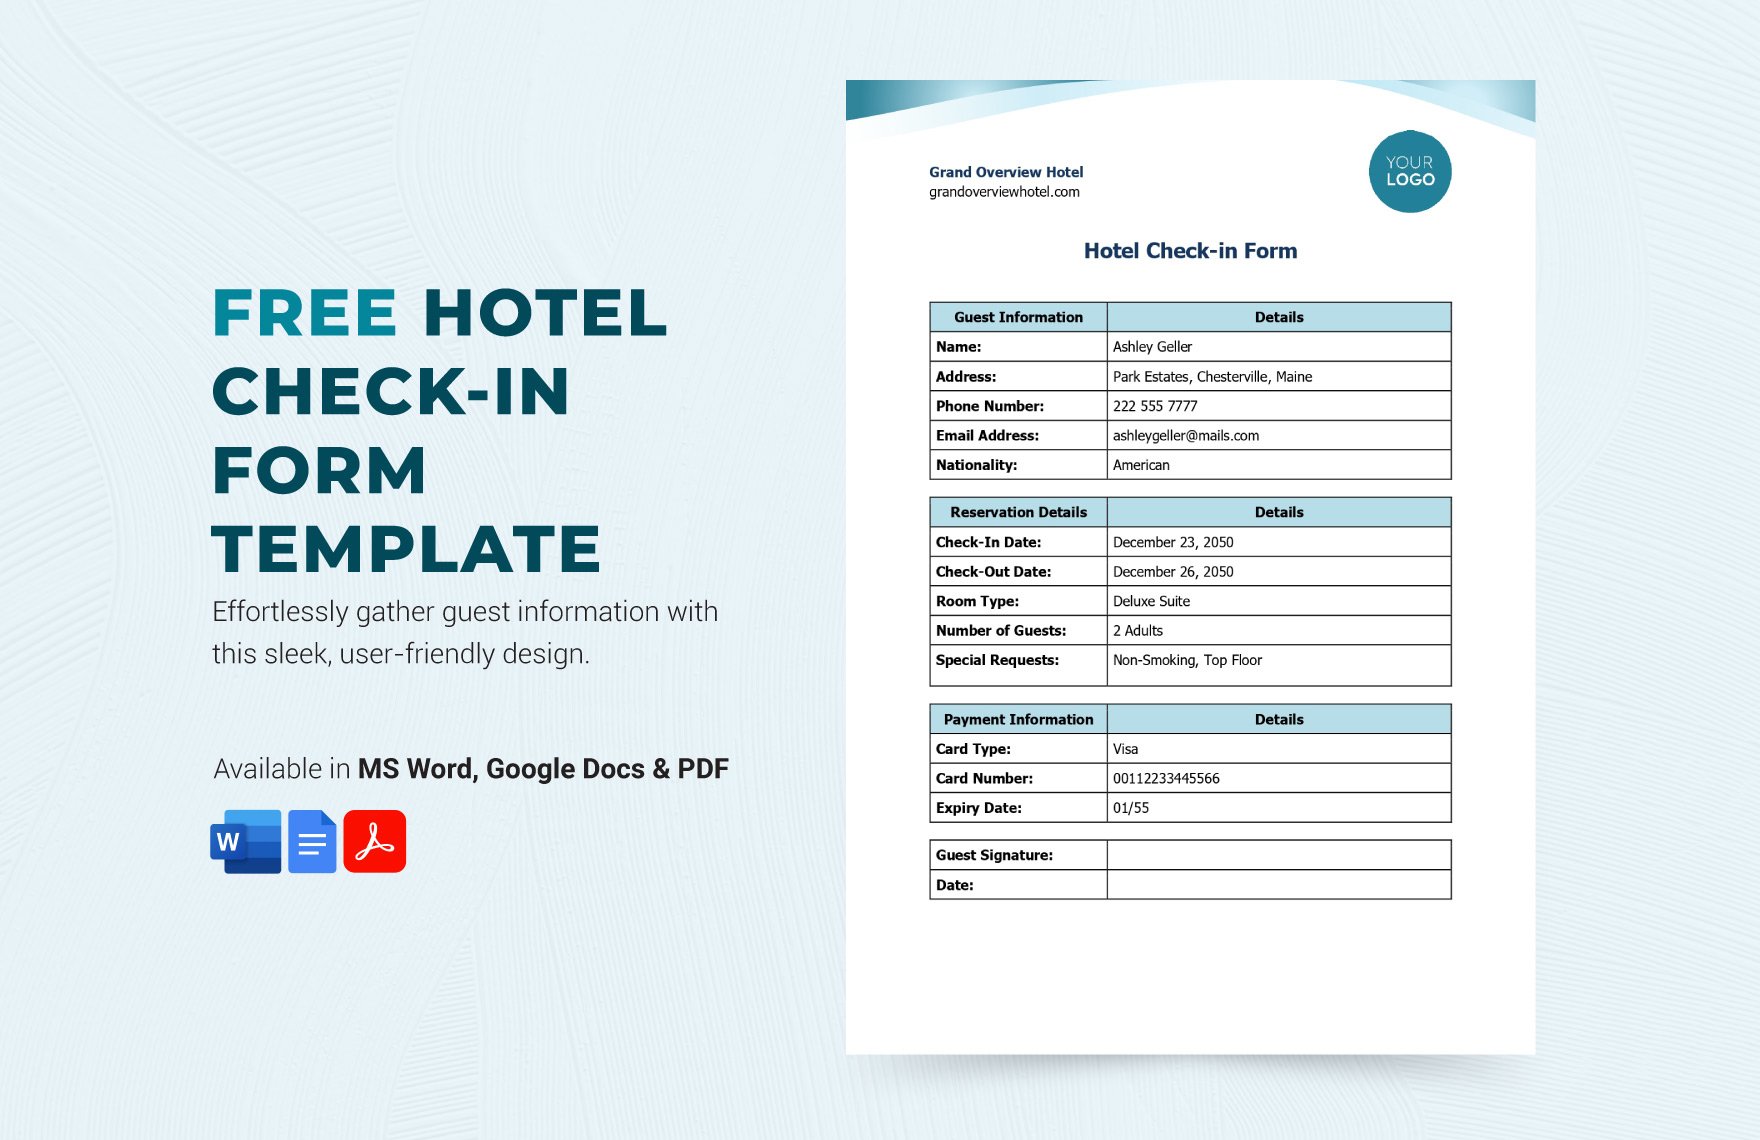 Hotel Check-in Form Template